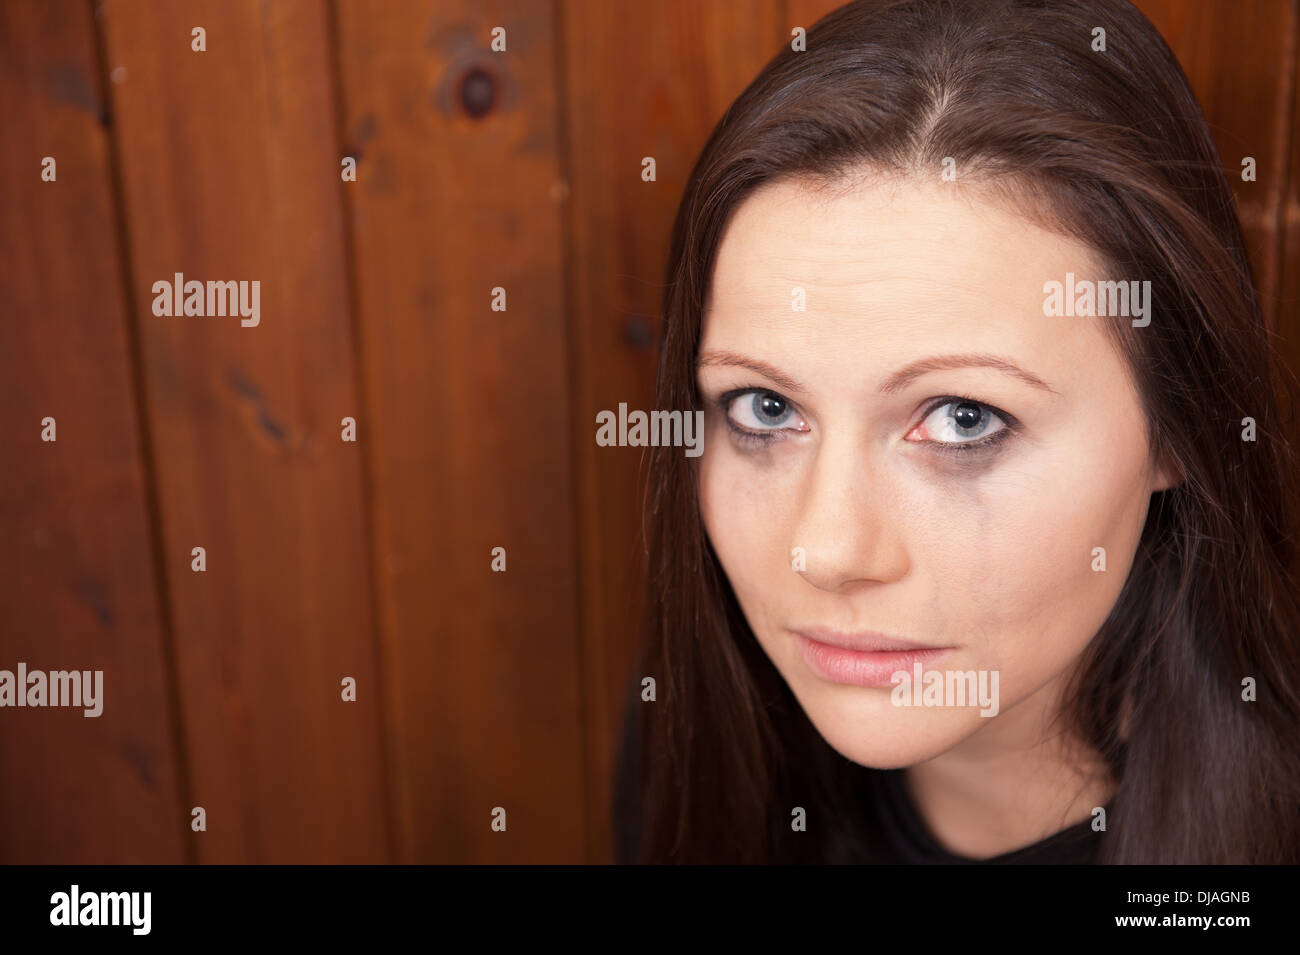 Upset looking young woman with her eye make-up running down her face. Maybe a victim of domestic violence, bullying or abuse. Stock Photo